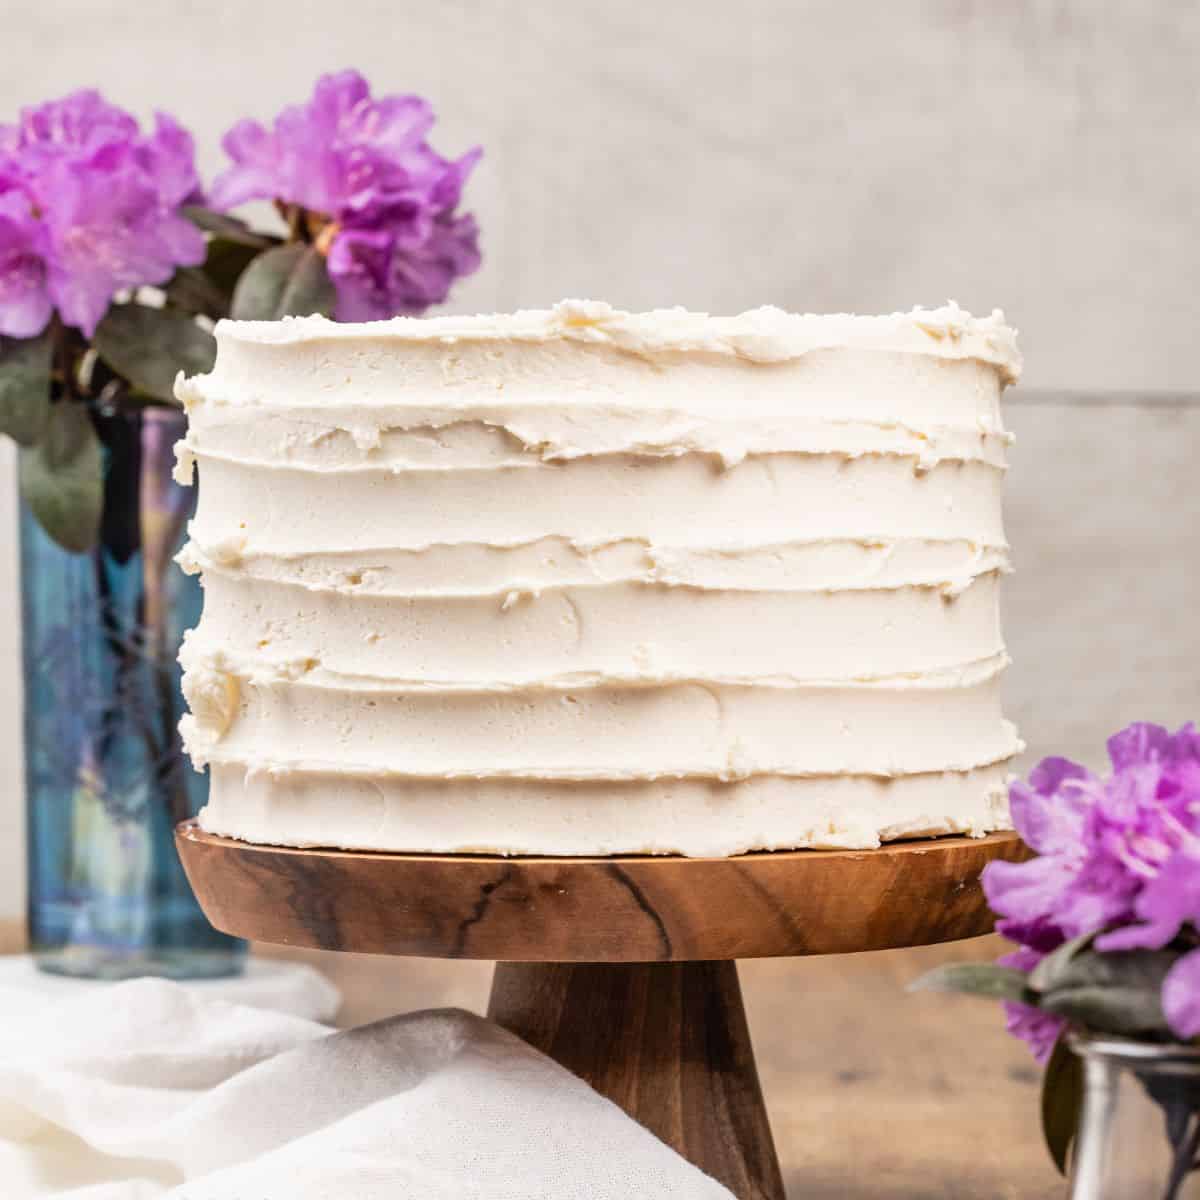 A vegan vanilla cake covered in vanilla frosting is on a wood cake stand. Vases of small purple flowers are next to the cake.